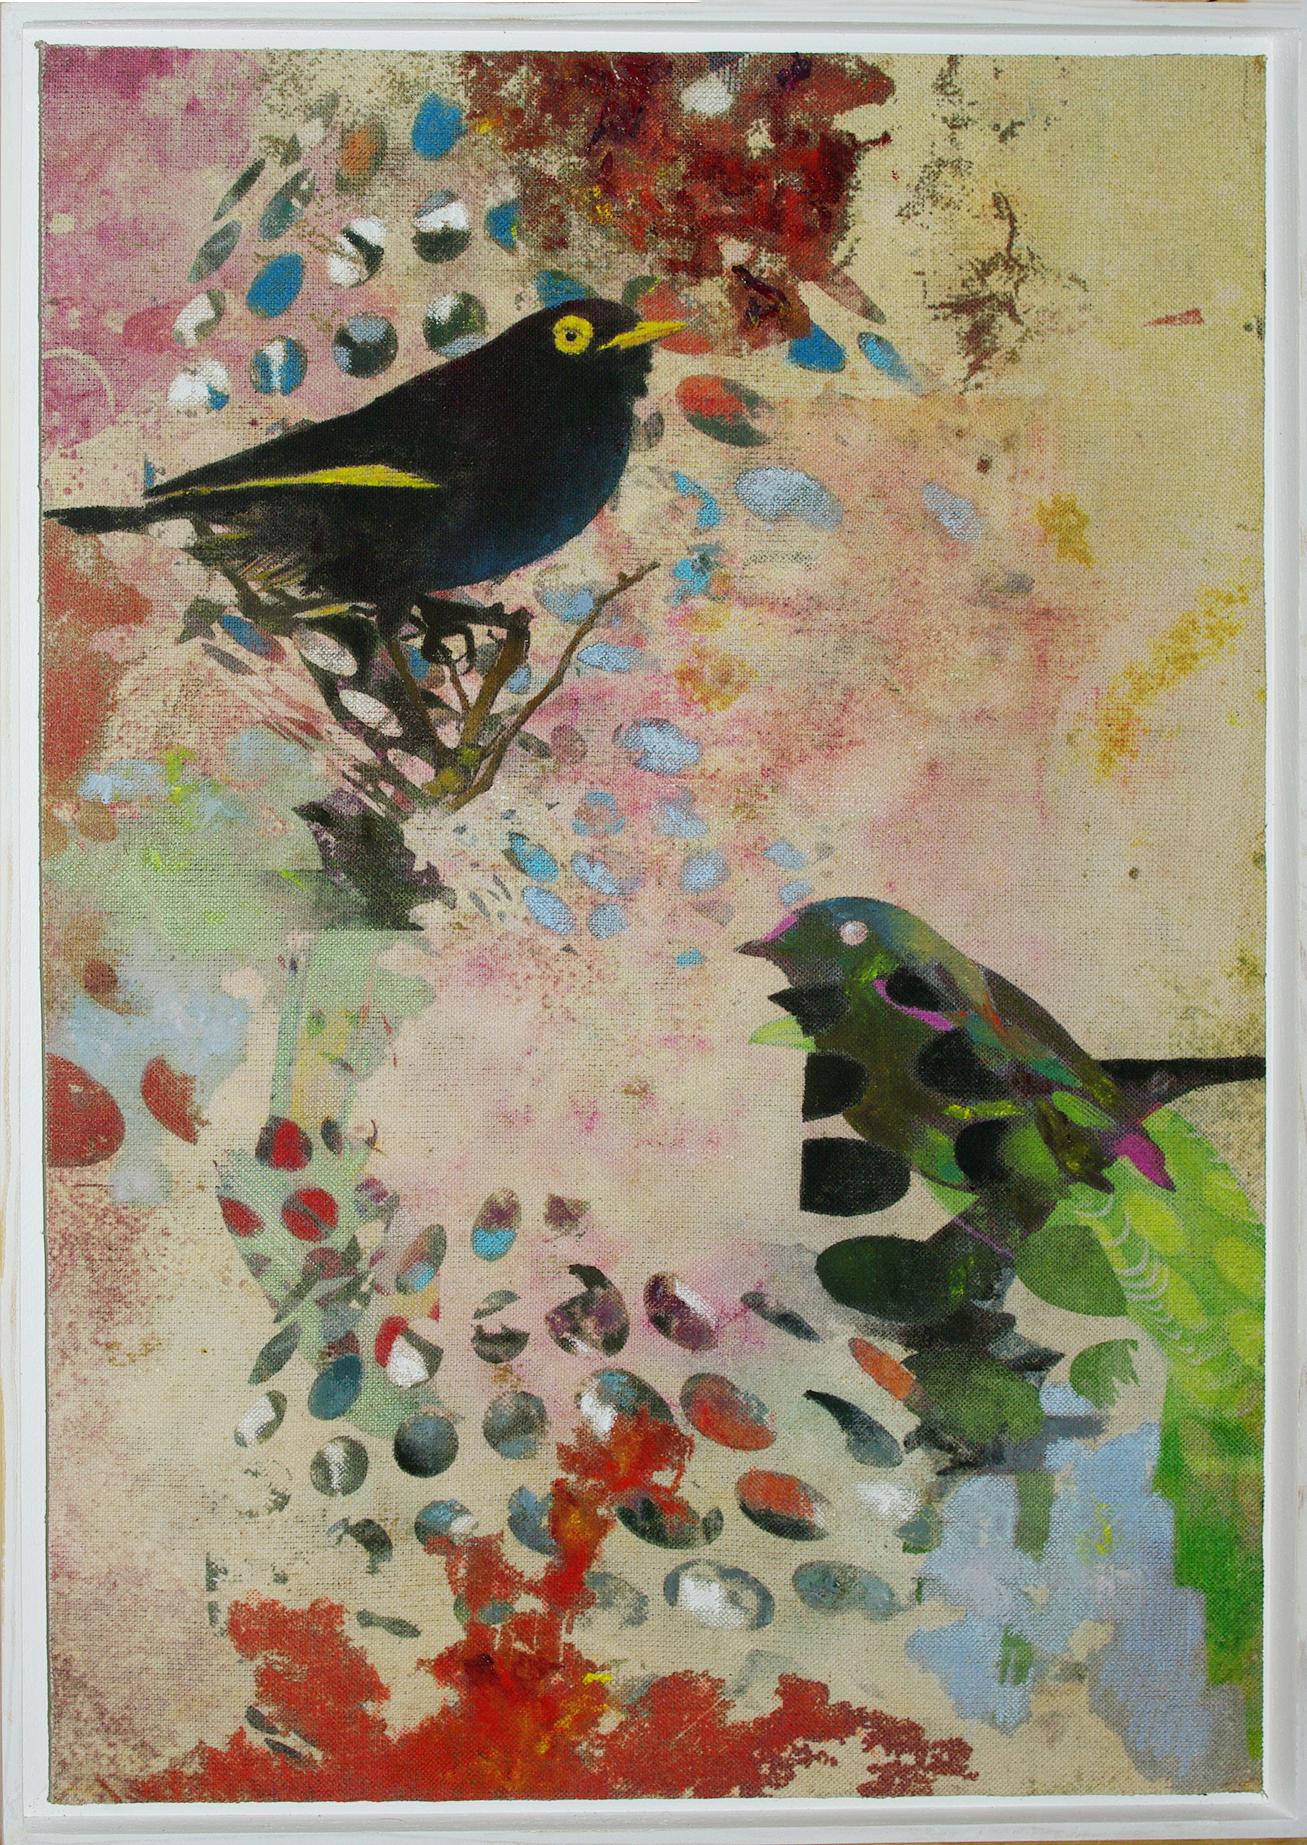 Birds 19a- Contemporary, Abstract, Expressionist, Modern, Street art, Surrealist - Mixed Media Art by Francisco Nicolás